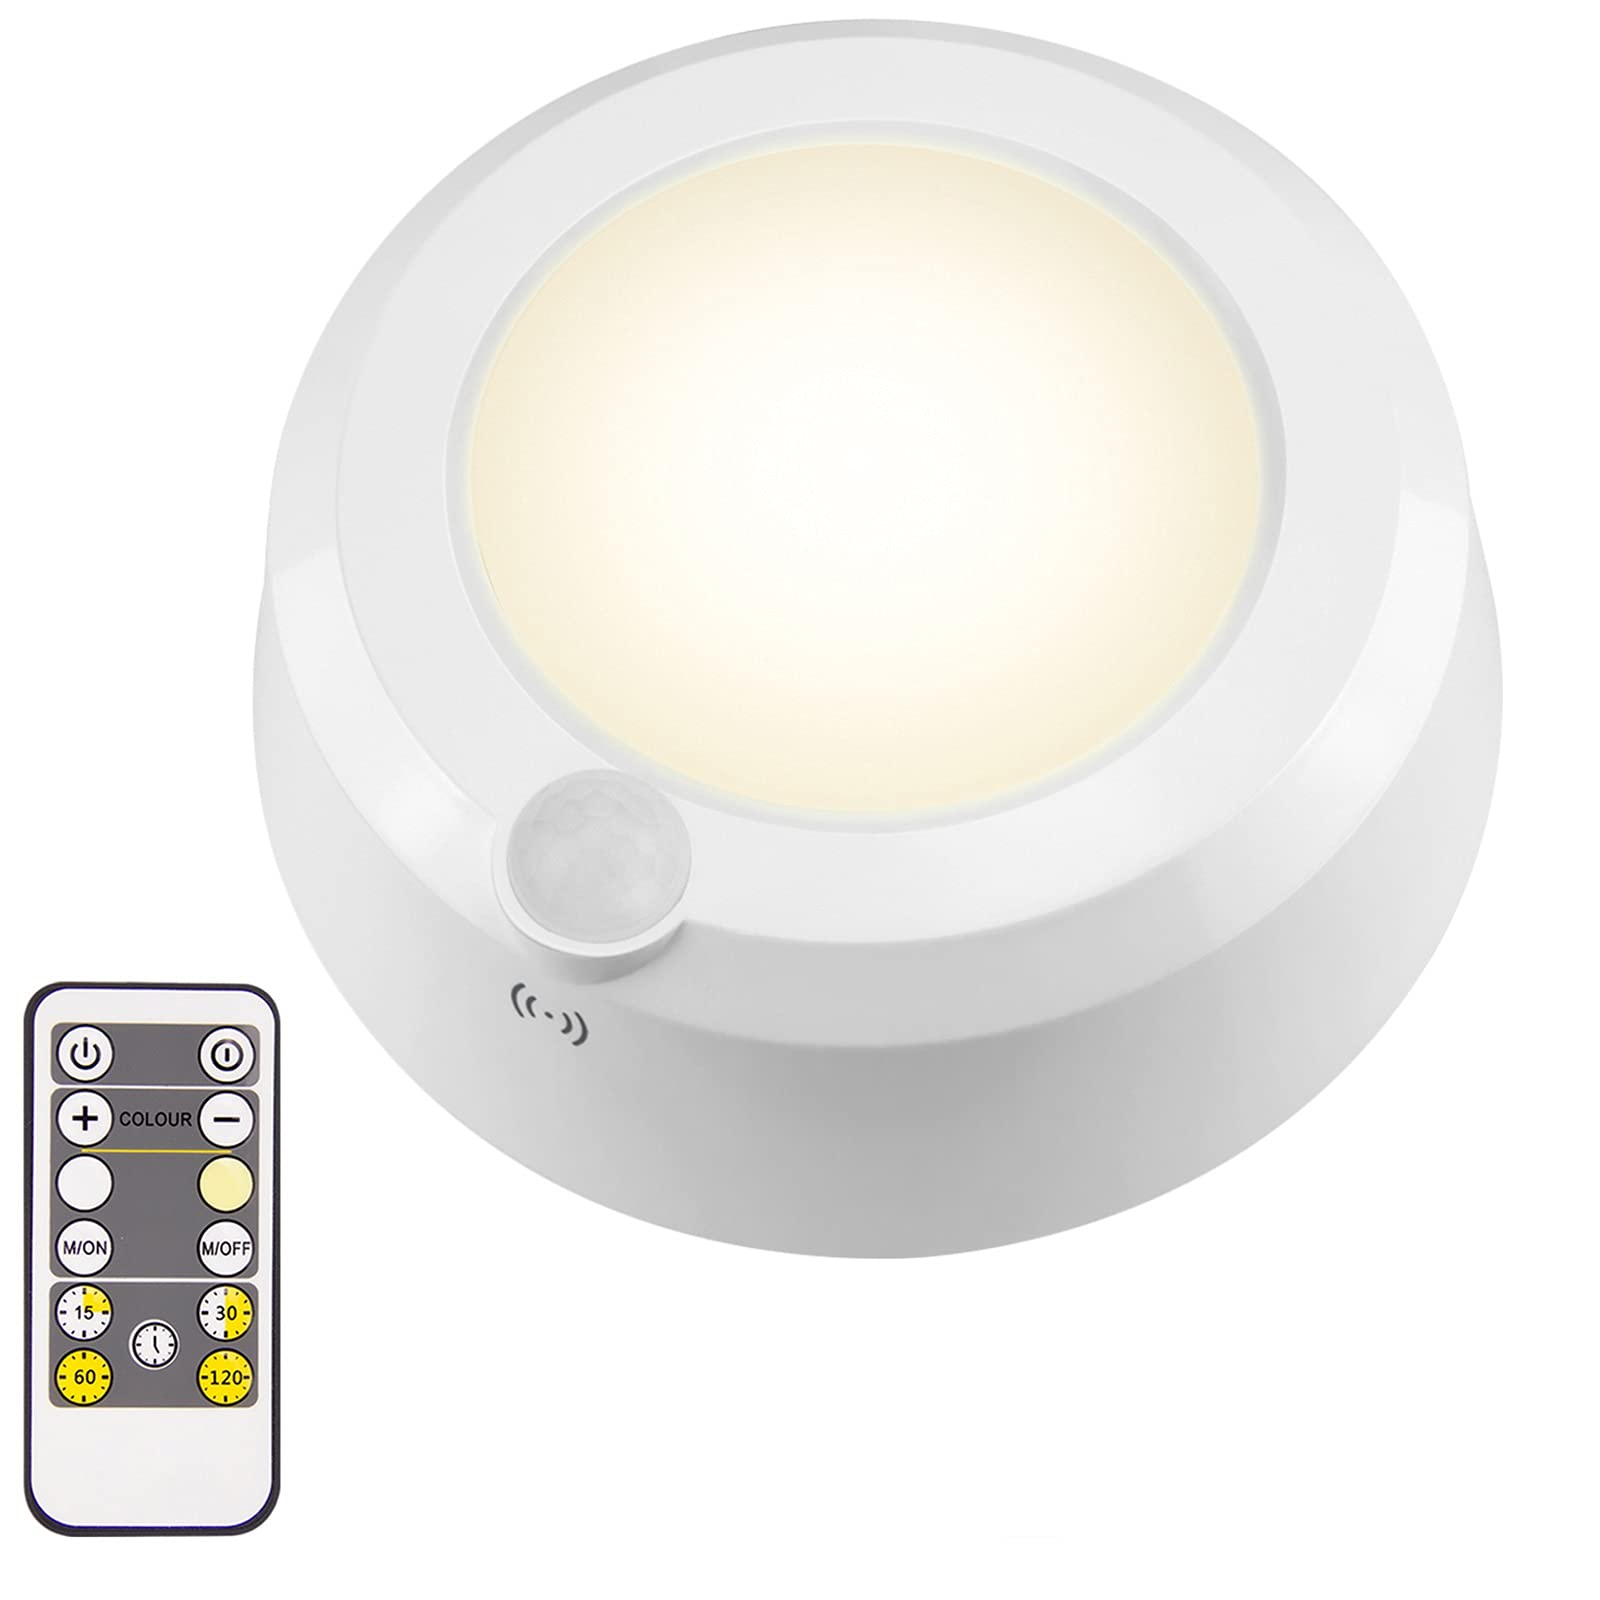 Battery Operated Overhead Shower Light with Motion